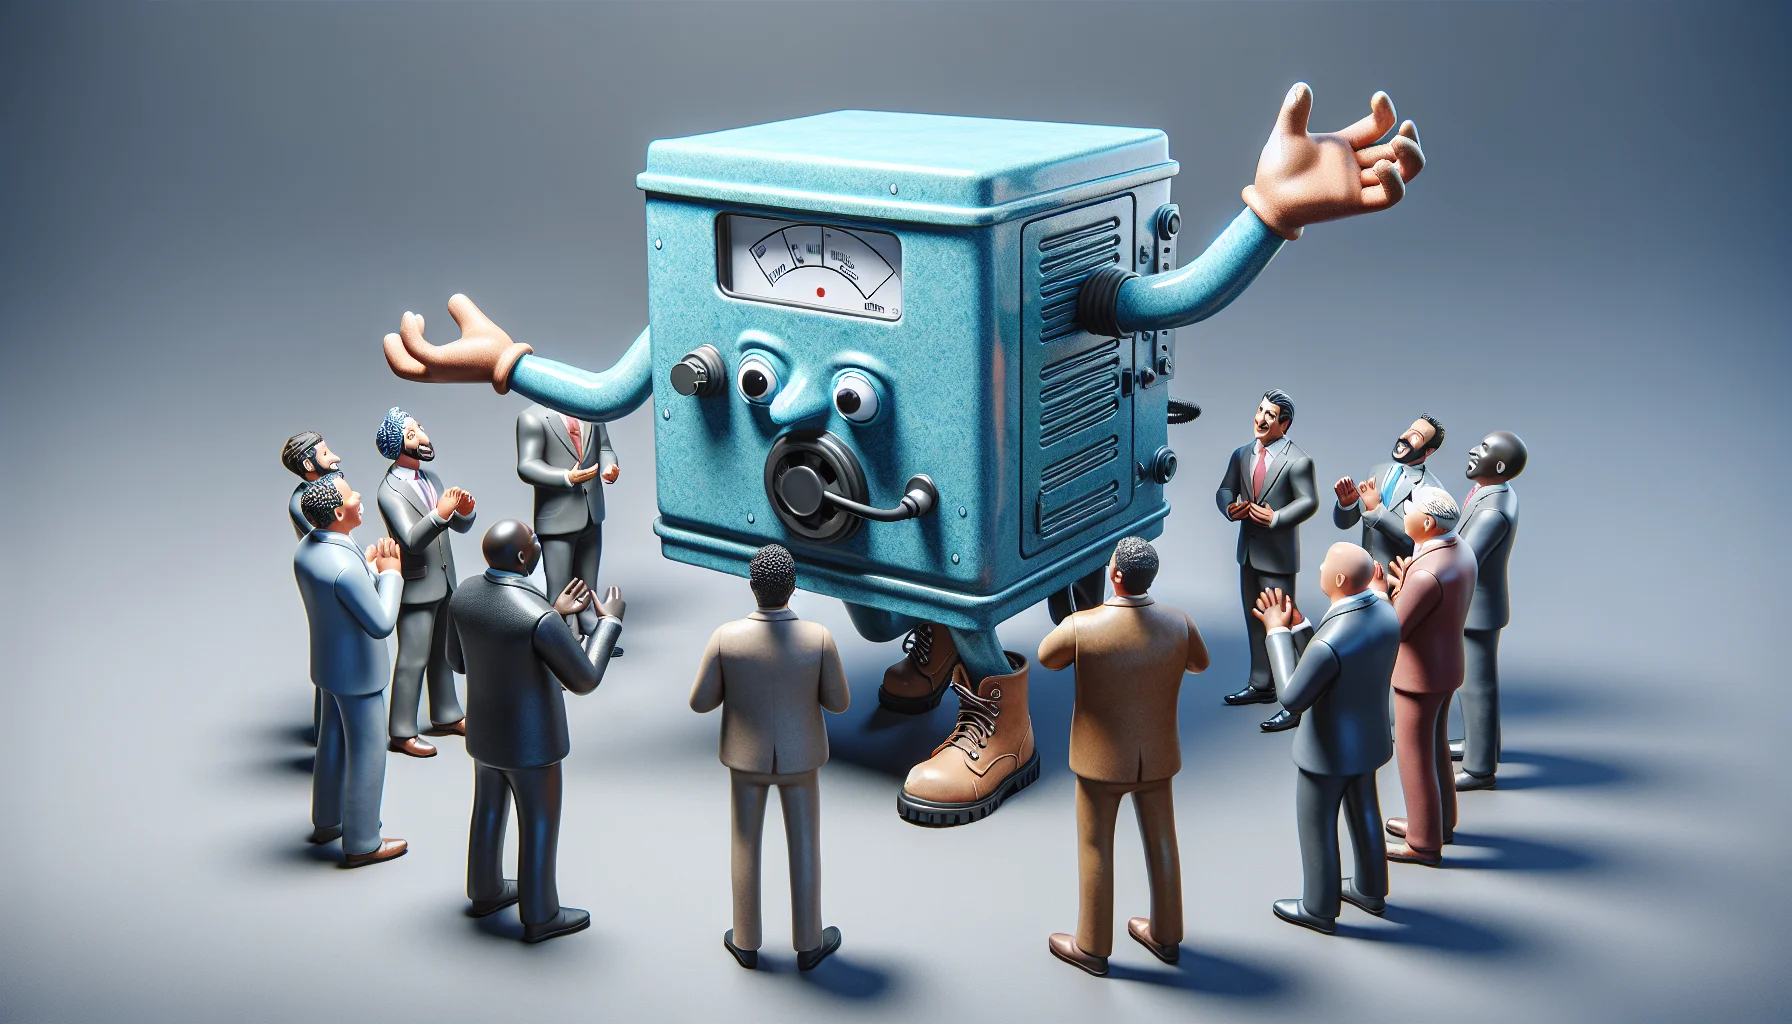 Generate a detailed and realistic image featuring a non-real, humorous character, who resembles a generator named 'Lifan Filter', in an amusing scenario. The character is ceramic blue with a rectangular body, has eyes on the upper front, and appendages that could be perceived as hands and feet. It playfully attempts to persuade a small crowd of people, made up of men and women from different descents such as Caucasian, Hispanic, Black, Middle-Eastern, and South Asian. The scene oozes with hilarity as Lifan Filter, displaying exaggerated gestures of persuasion, extols the benefits of generating electricity in an environmentally friendly way.